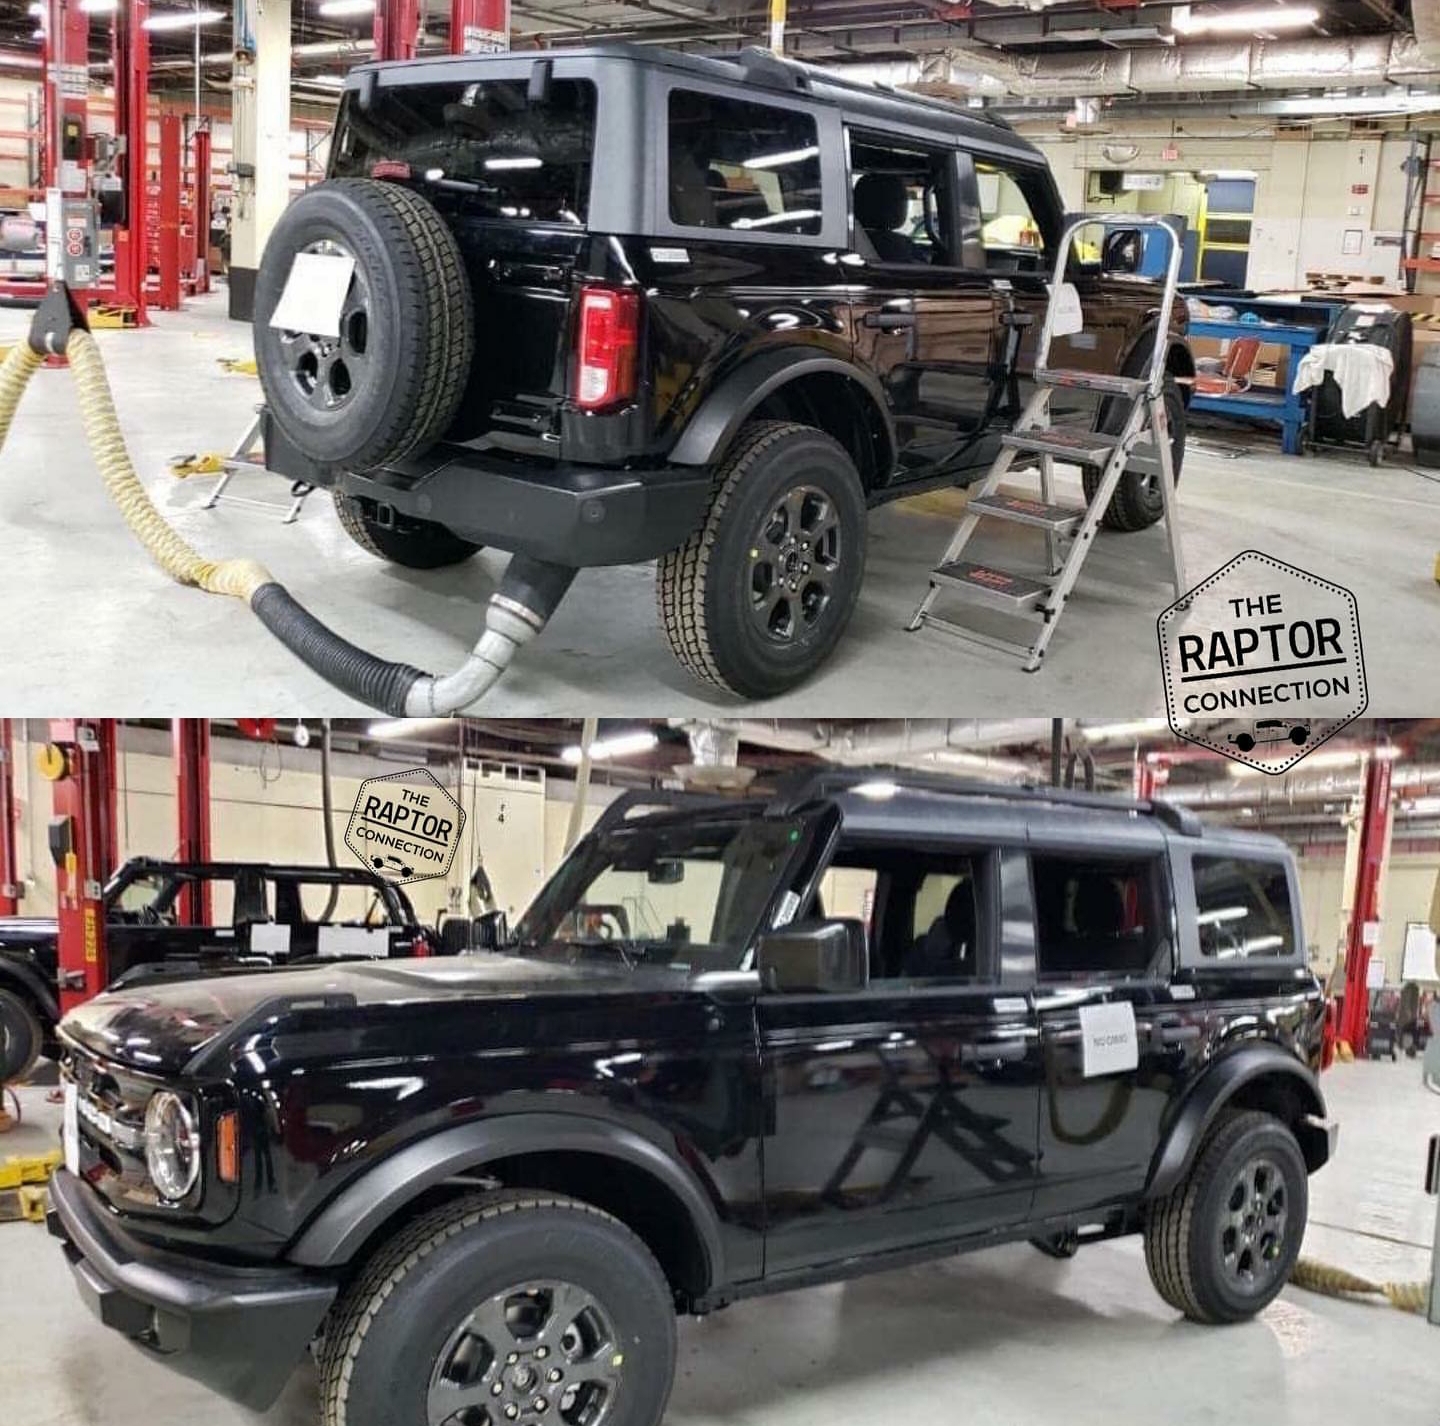 Ford Bronco Leaked: Ford Bronco Family Silhouette Teaser (First Top Off Look)! Leaked 2021 Ford Bronco 4 Door Black 2 Door Topless Pics